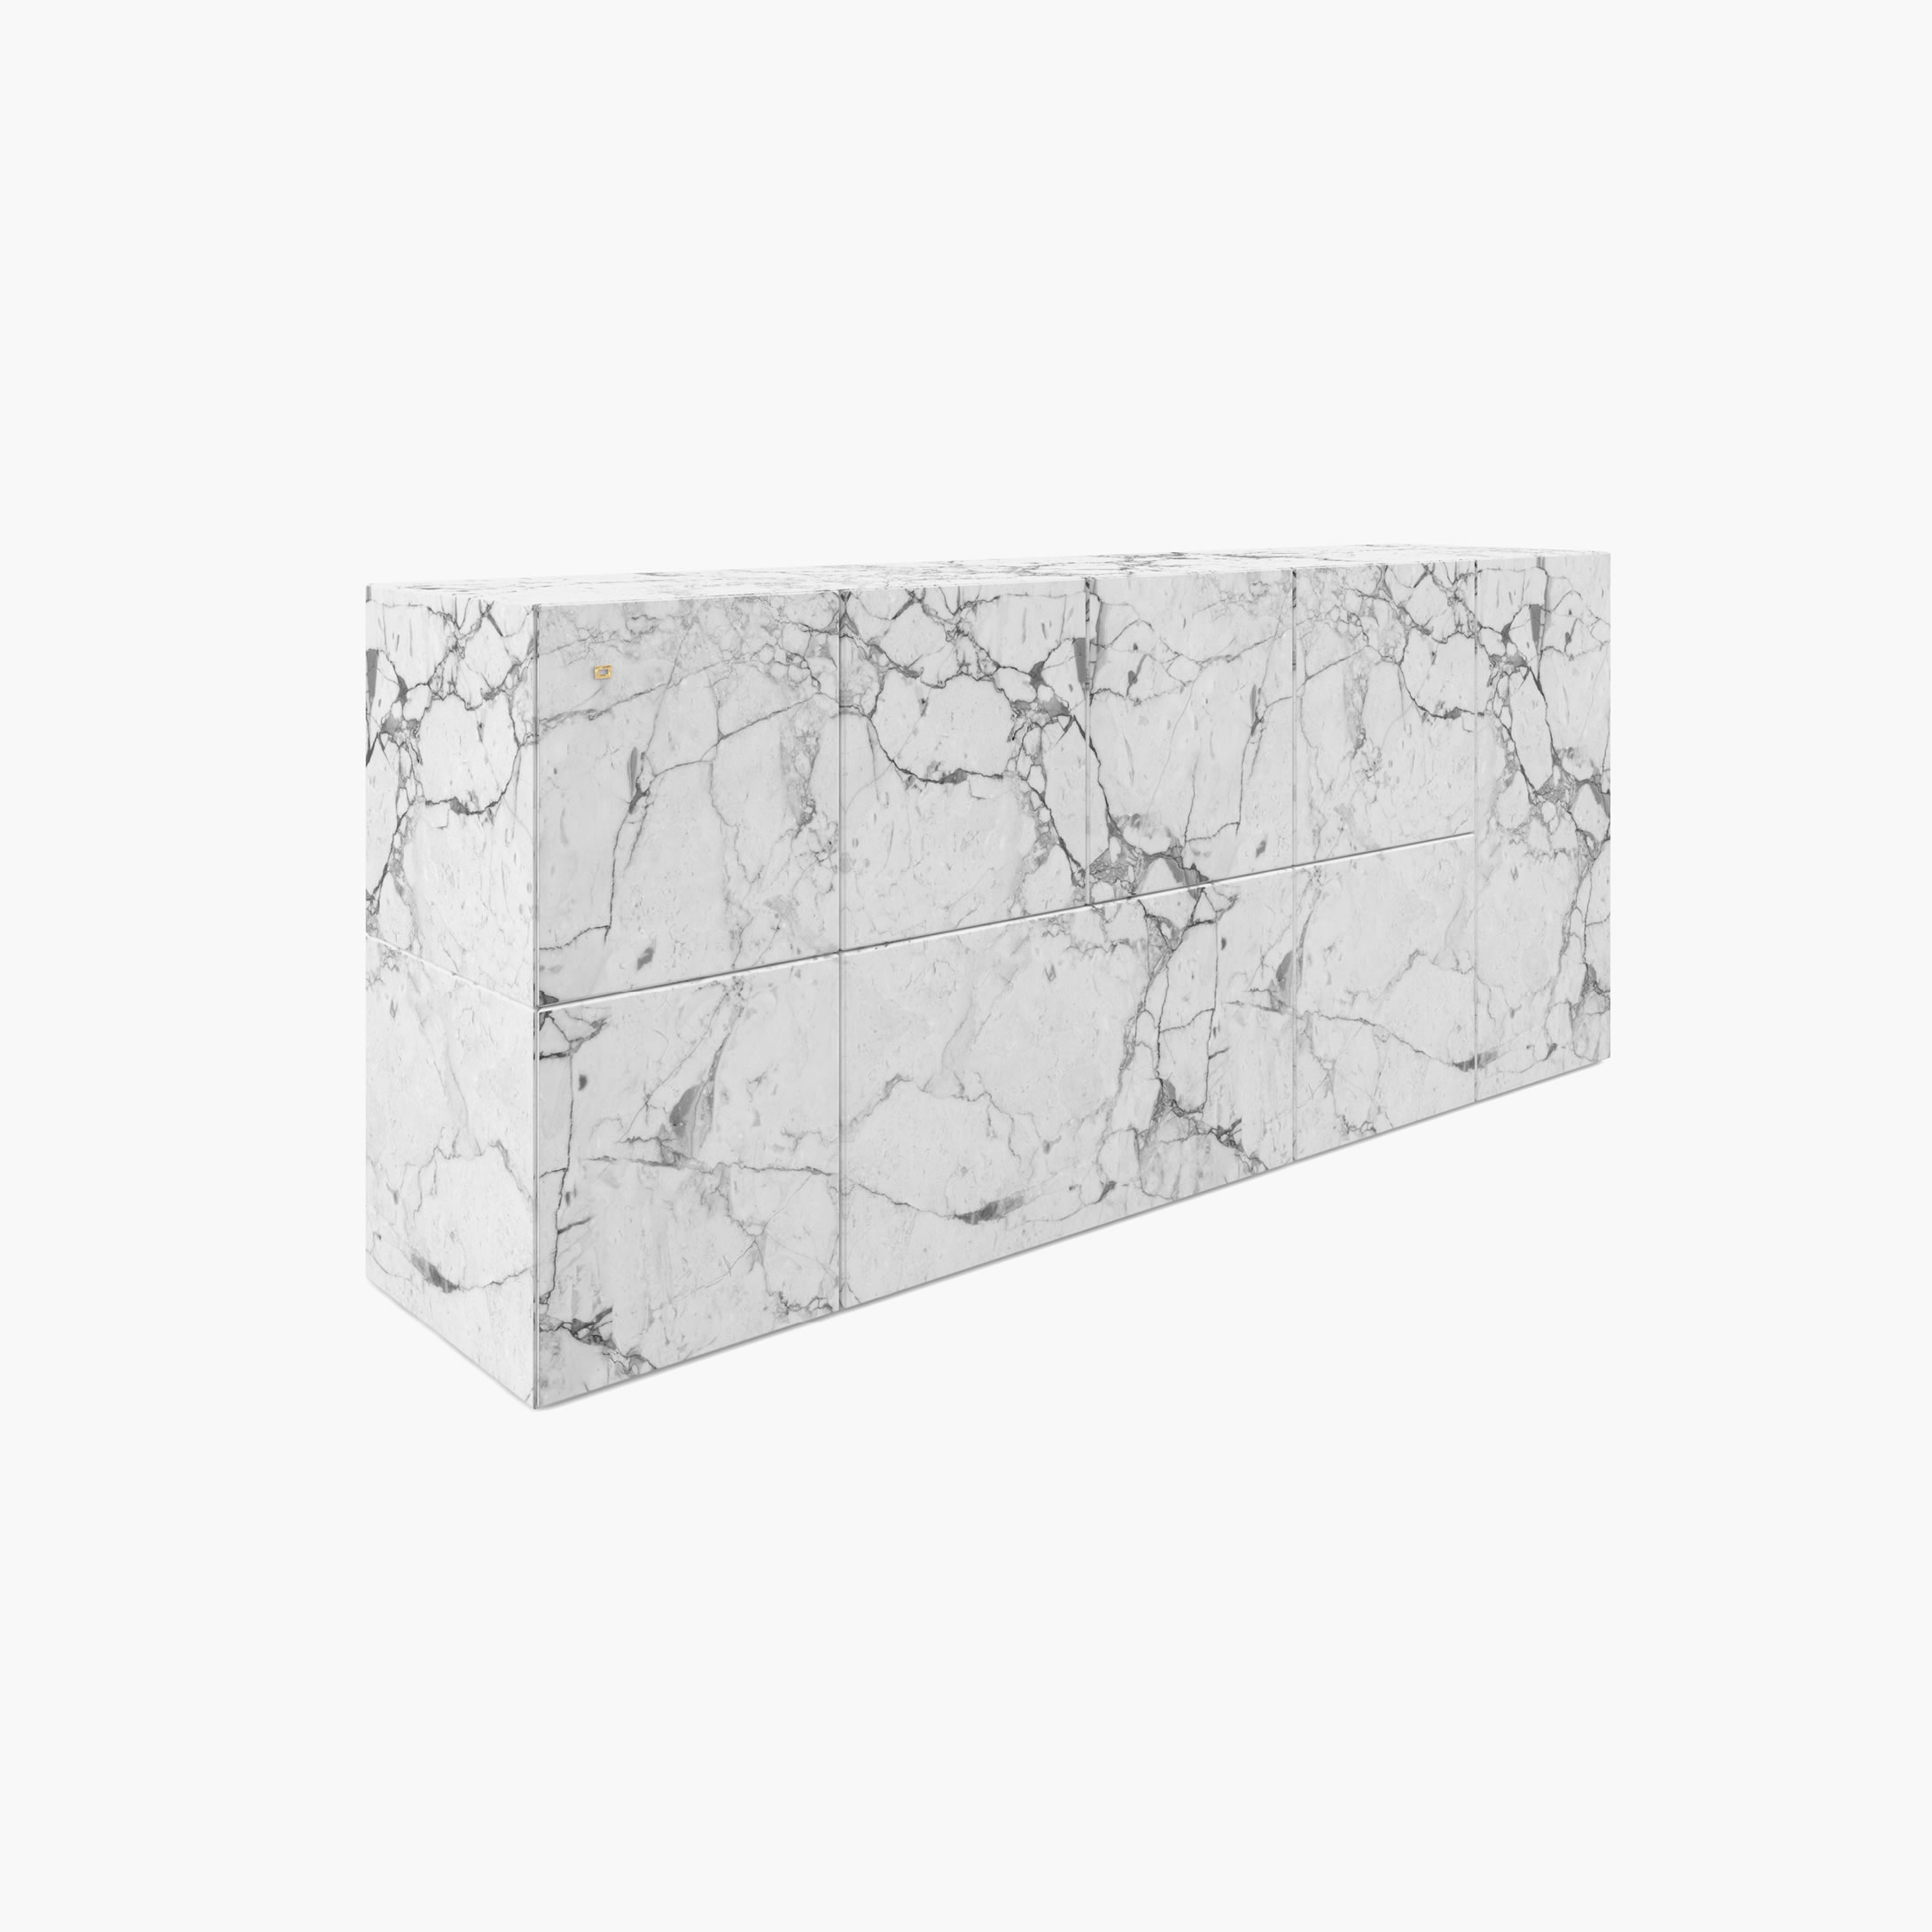 Sideboard of cubes White Arabescato Marble amazing Living Room designer Consoles  Sideboards FS 21 A FELIX SCHWAKE